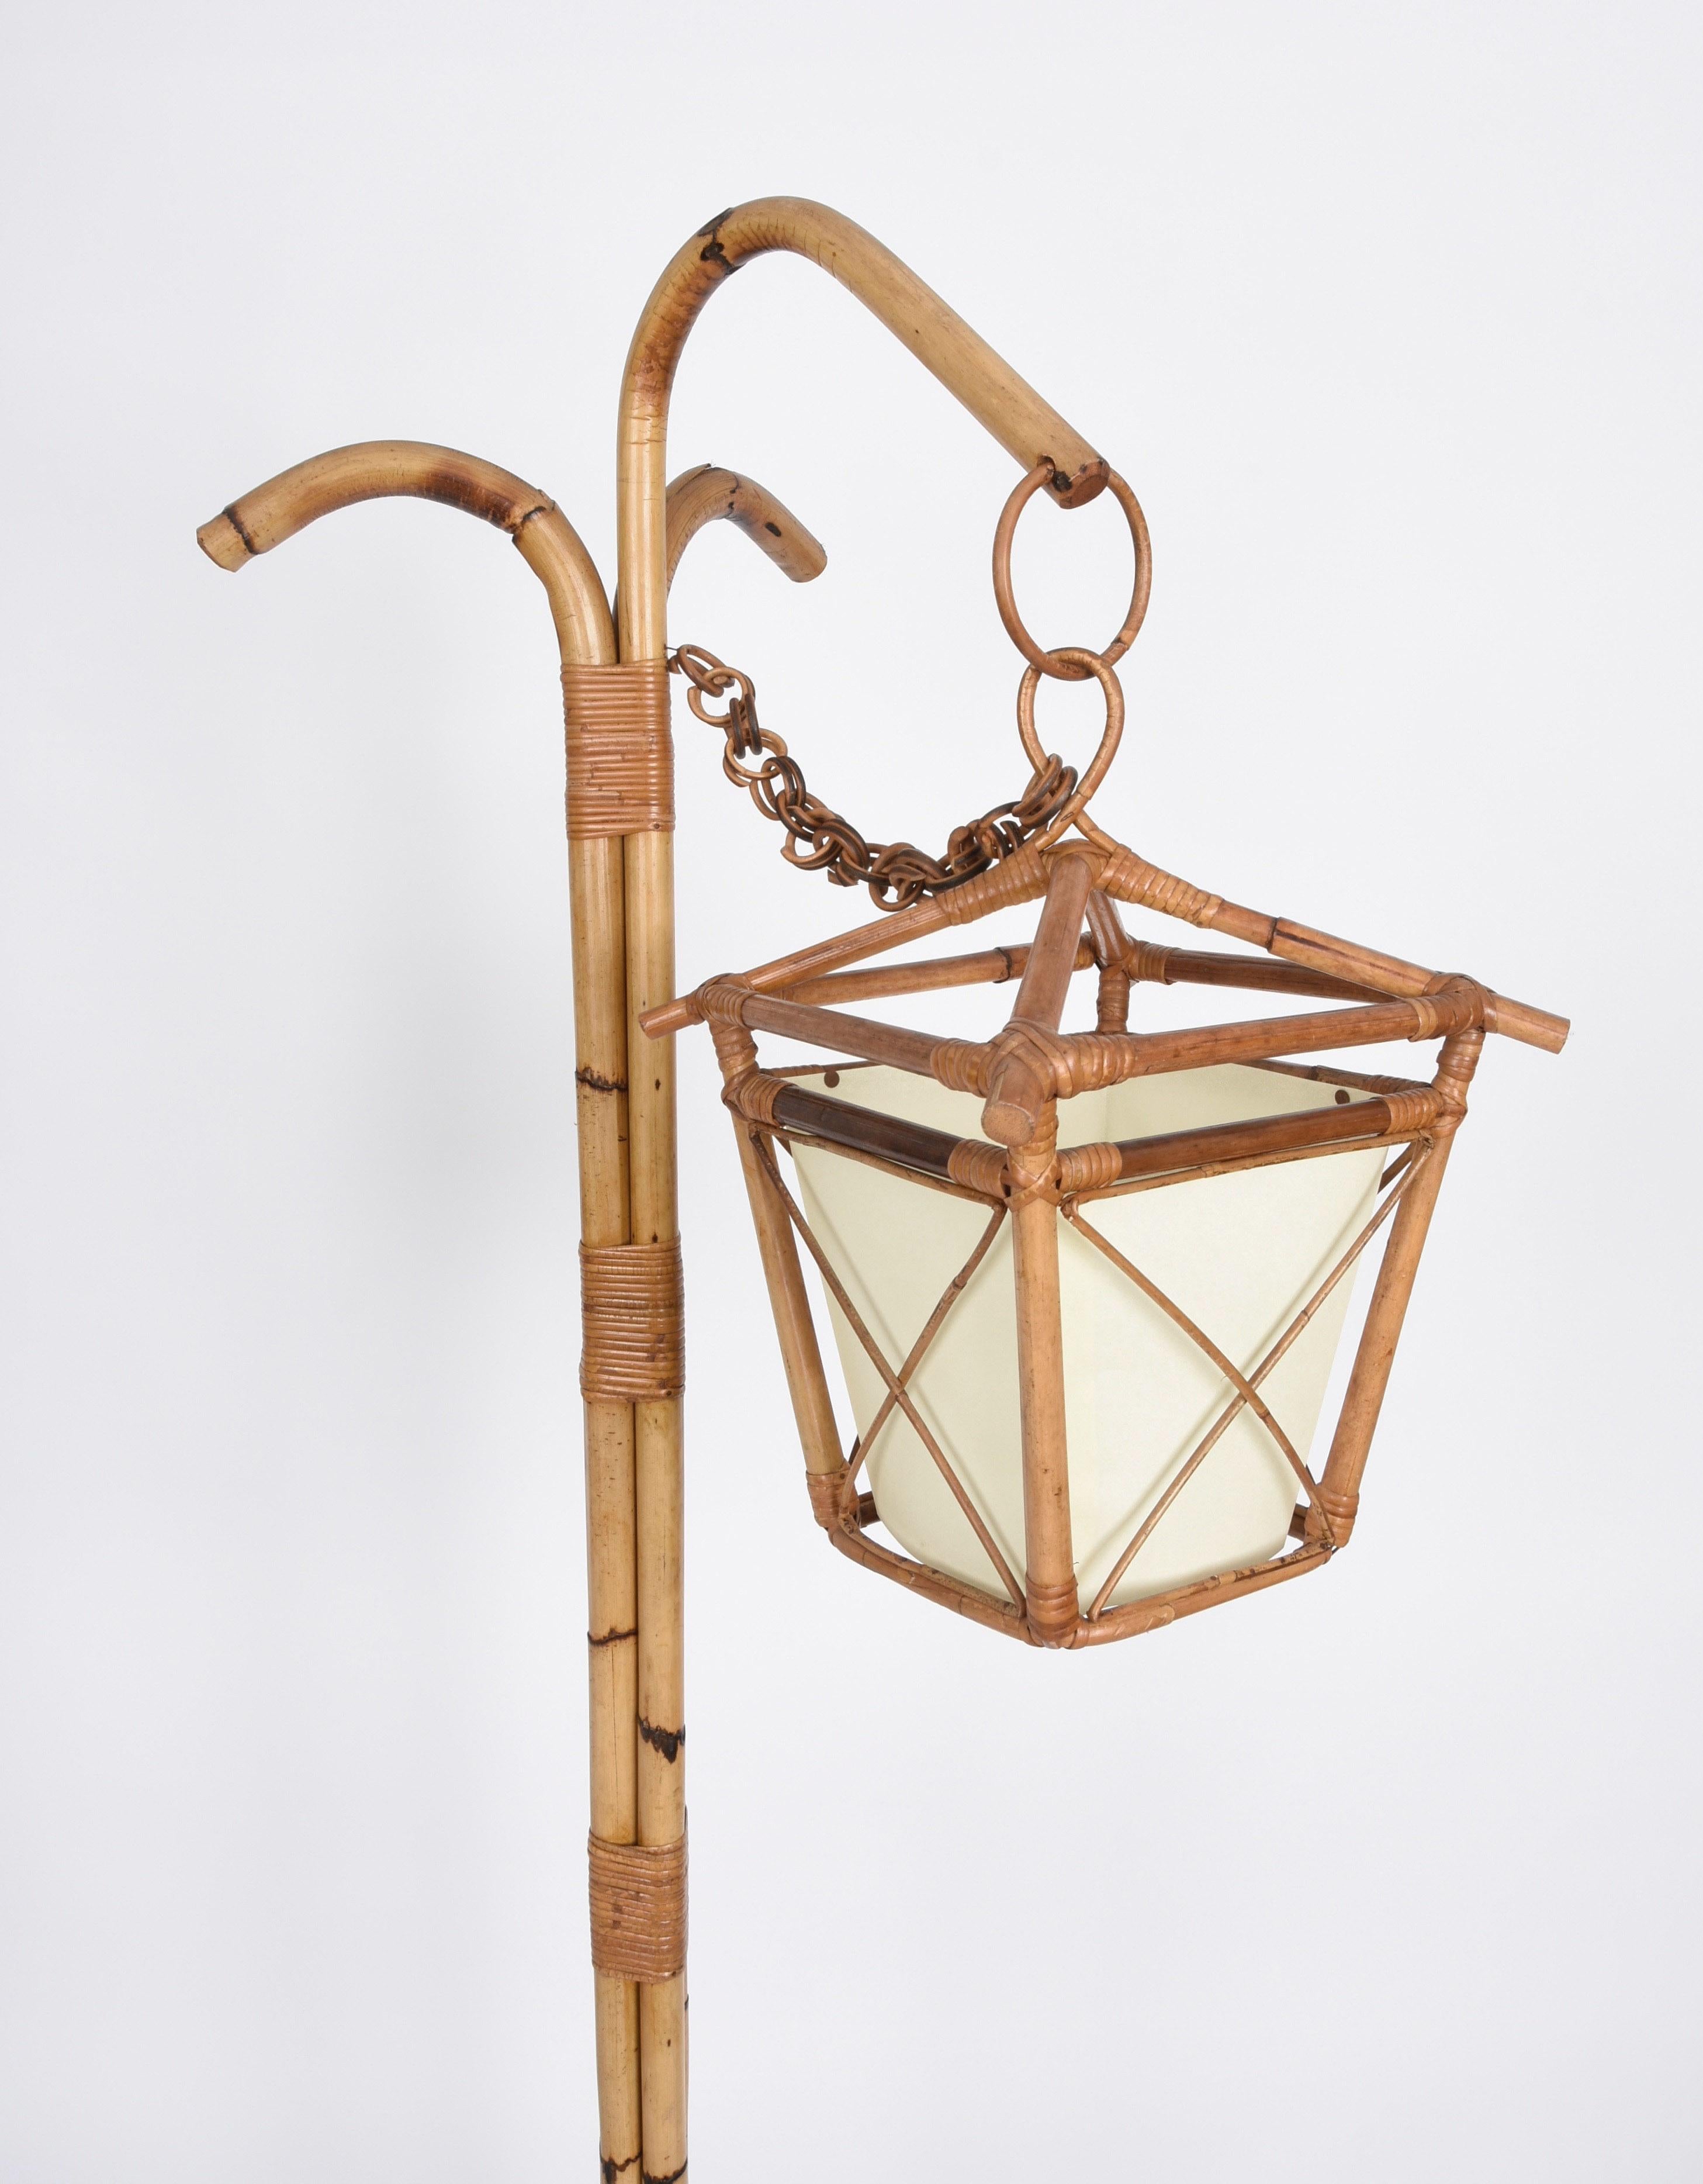 Midcentury Bamboo and Rattan Italian Floor Lamp with Tripod Base, 1950s For Sale 4